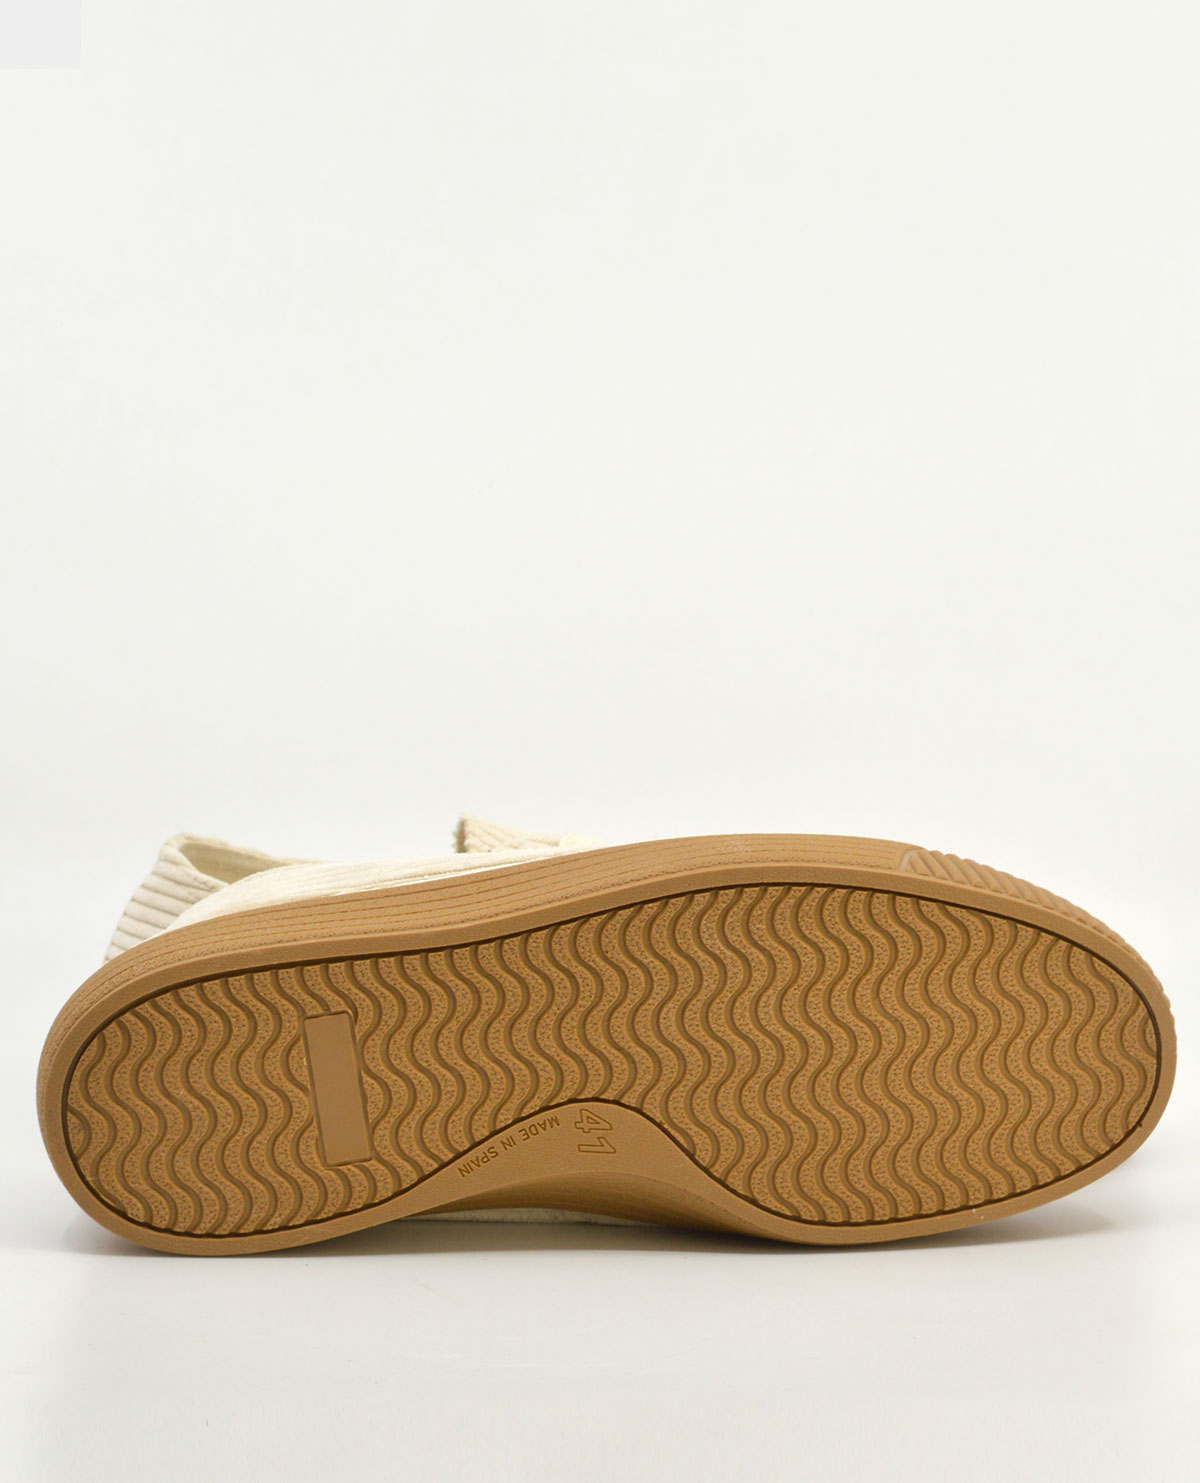 The “Mateo” Shoe In Cream Cord – Mod Shoes